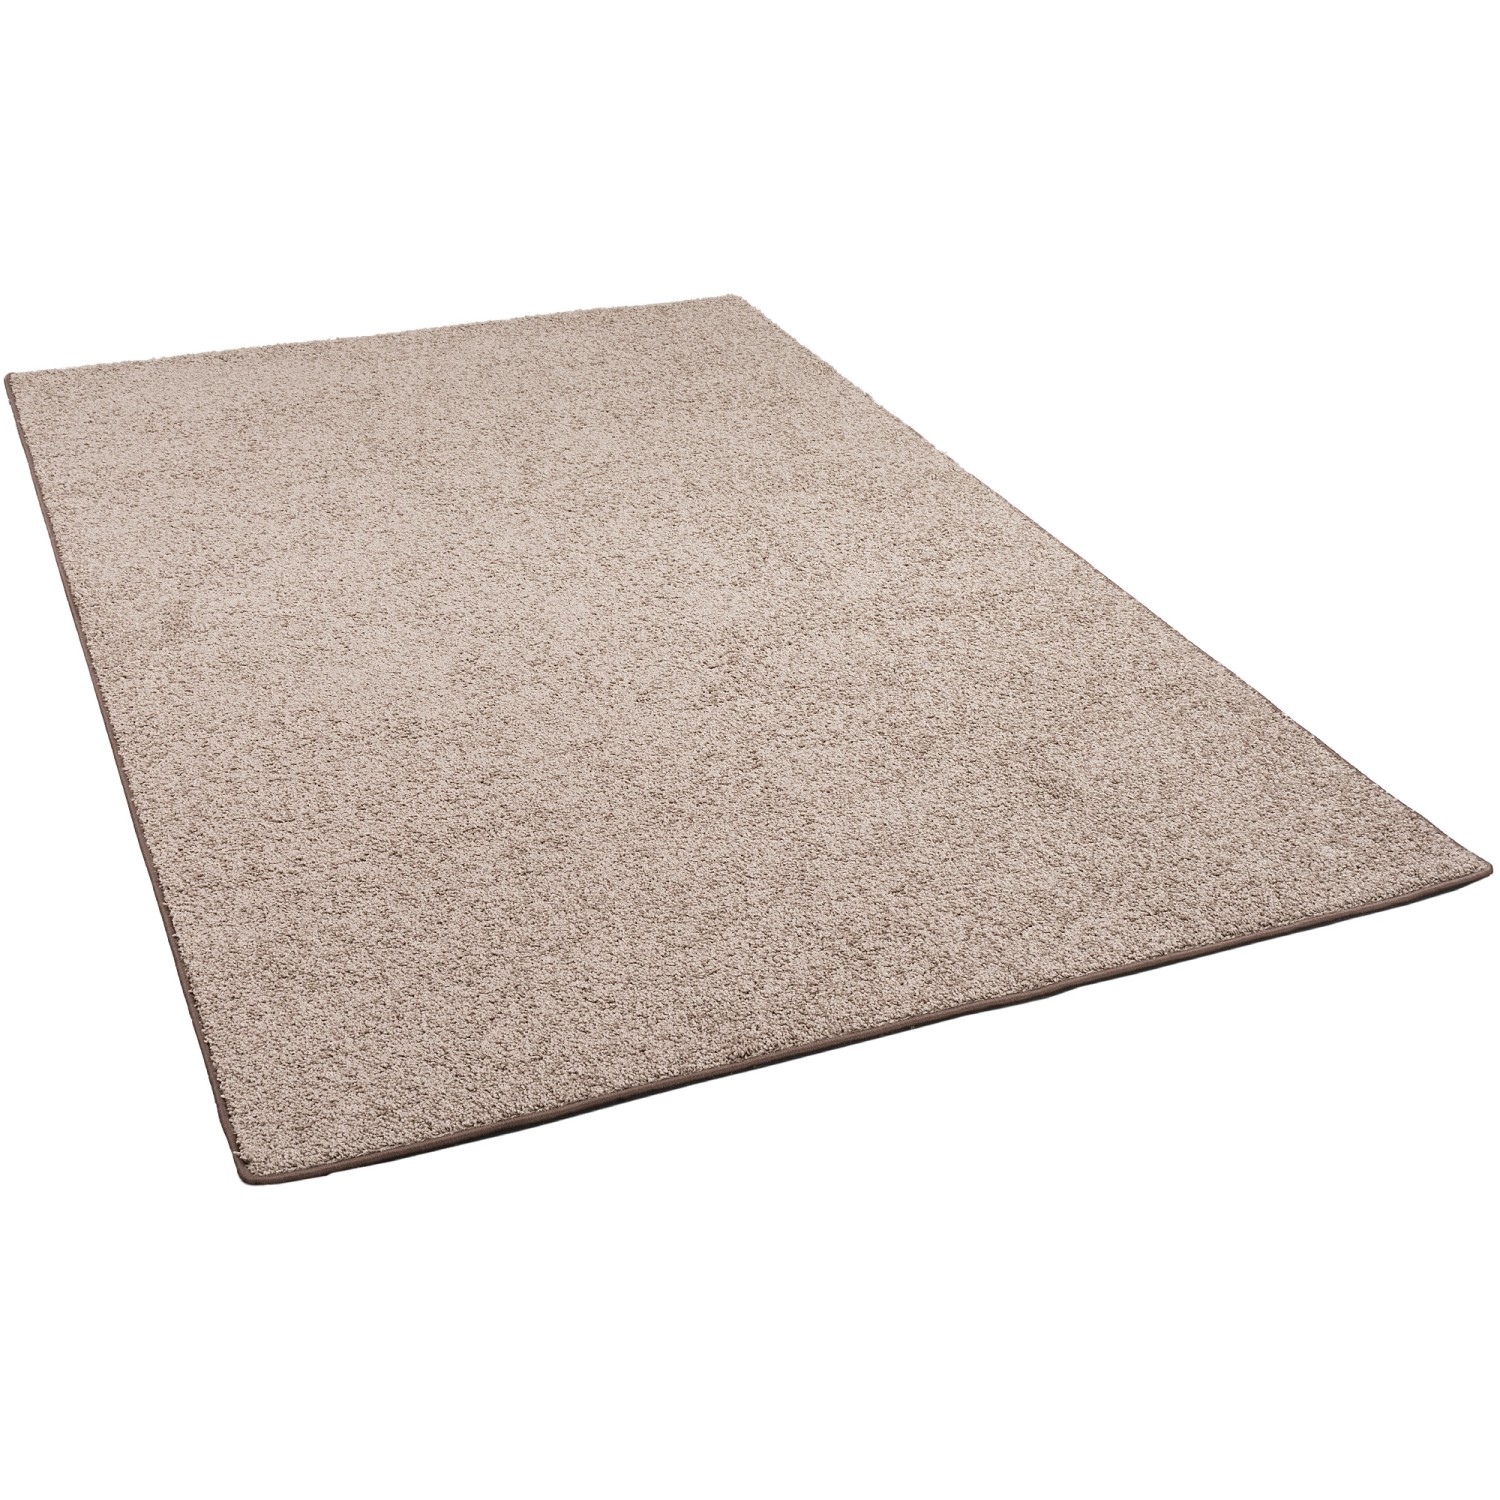 Snapstyle Hochflor Velours Teppich Mona Taupe 100x100cm